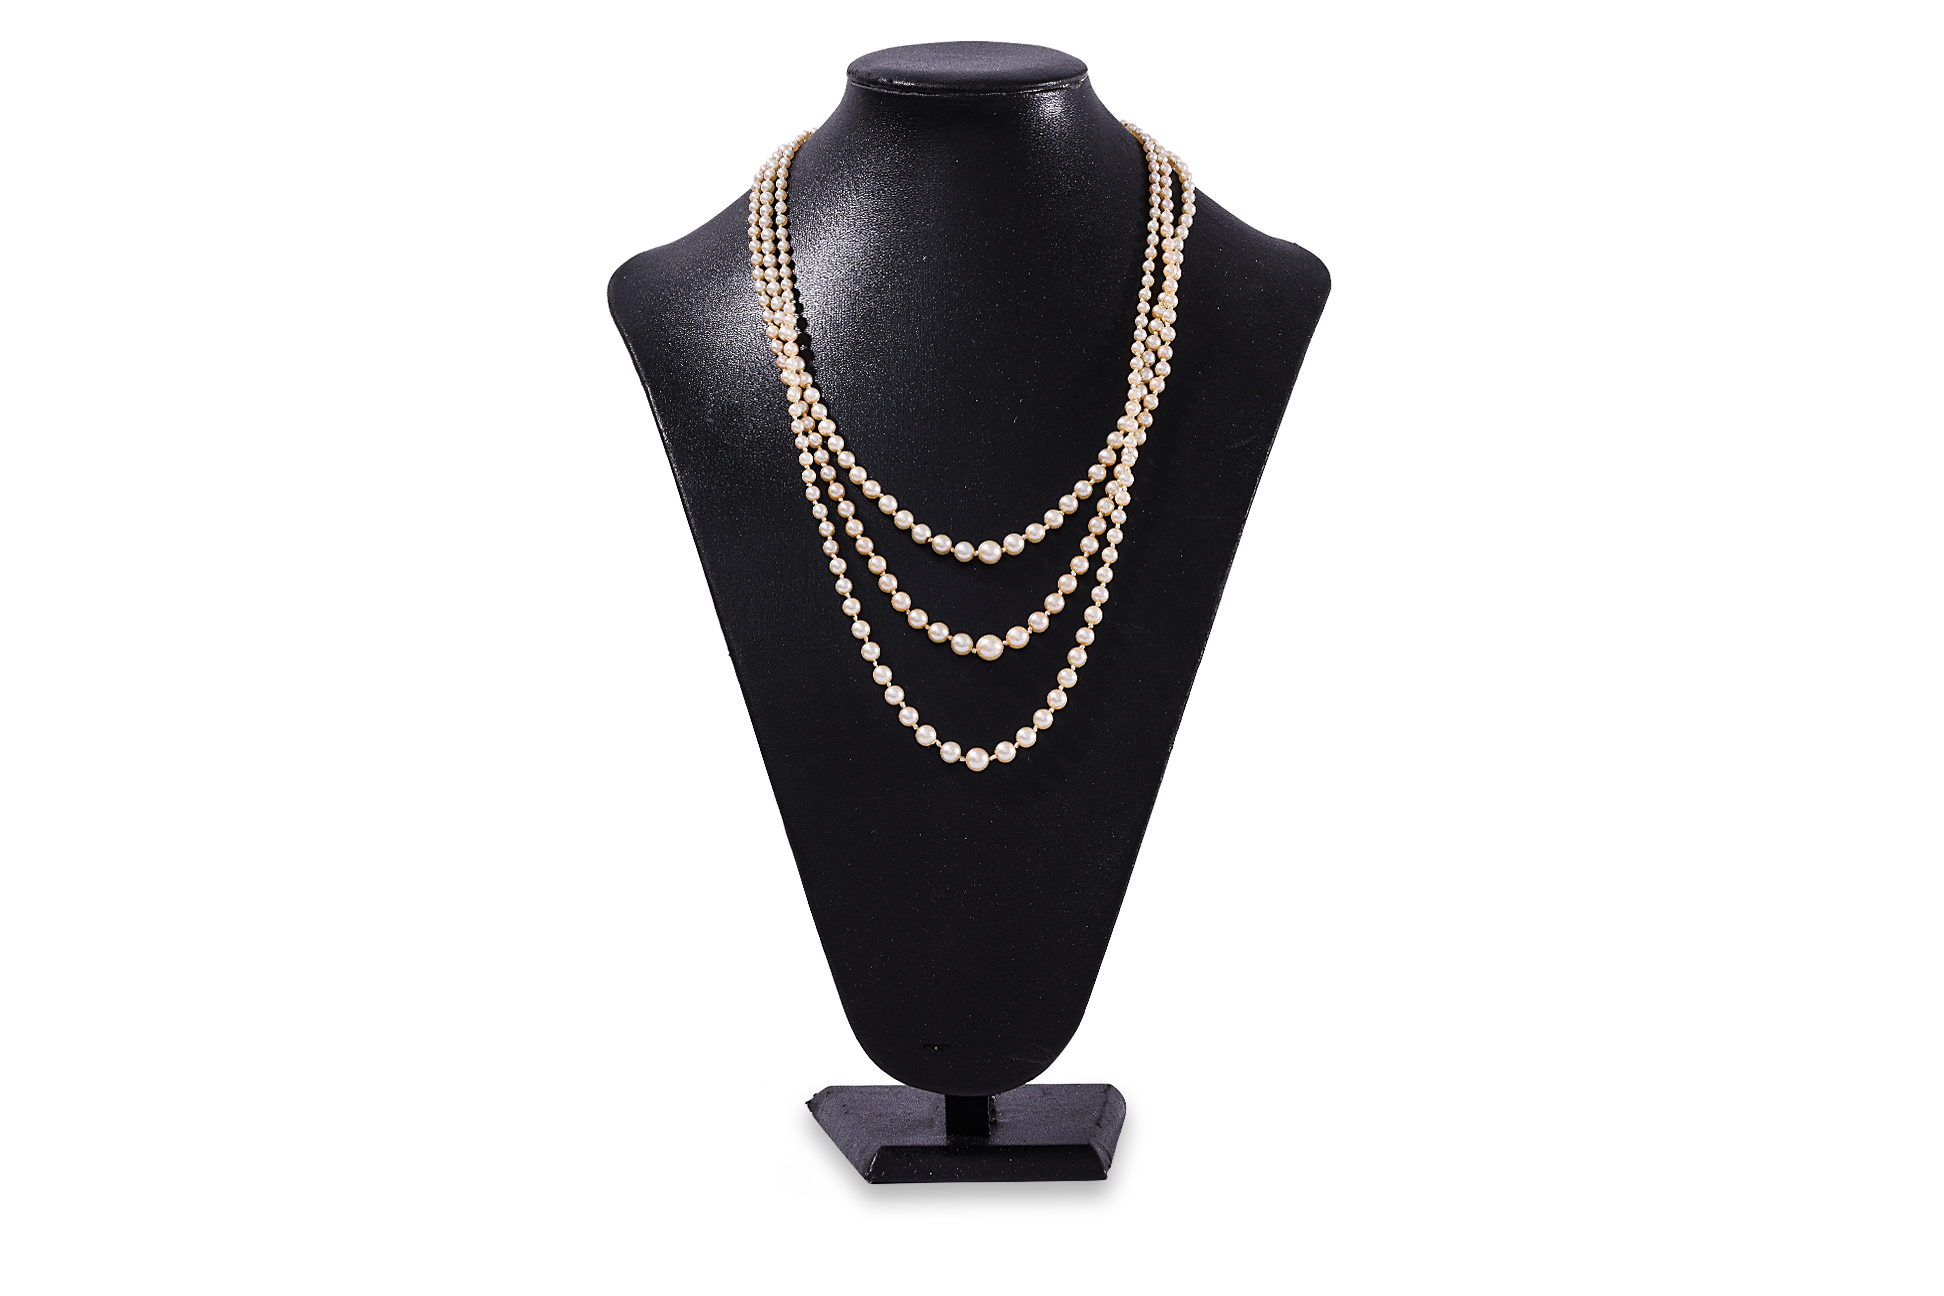 A THREE STRAND AKOYA CULTURED PEARL NECKLACE - Image 4 of 5